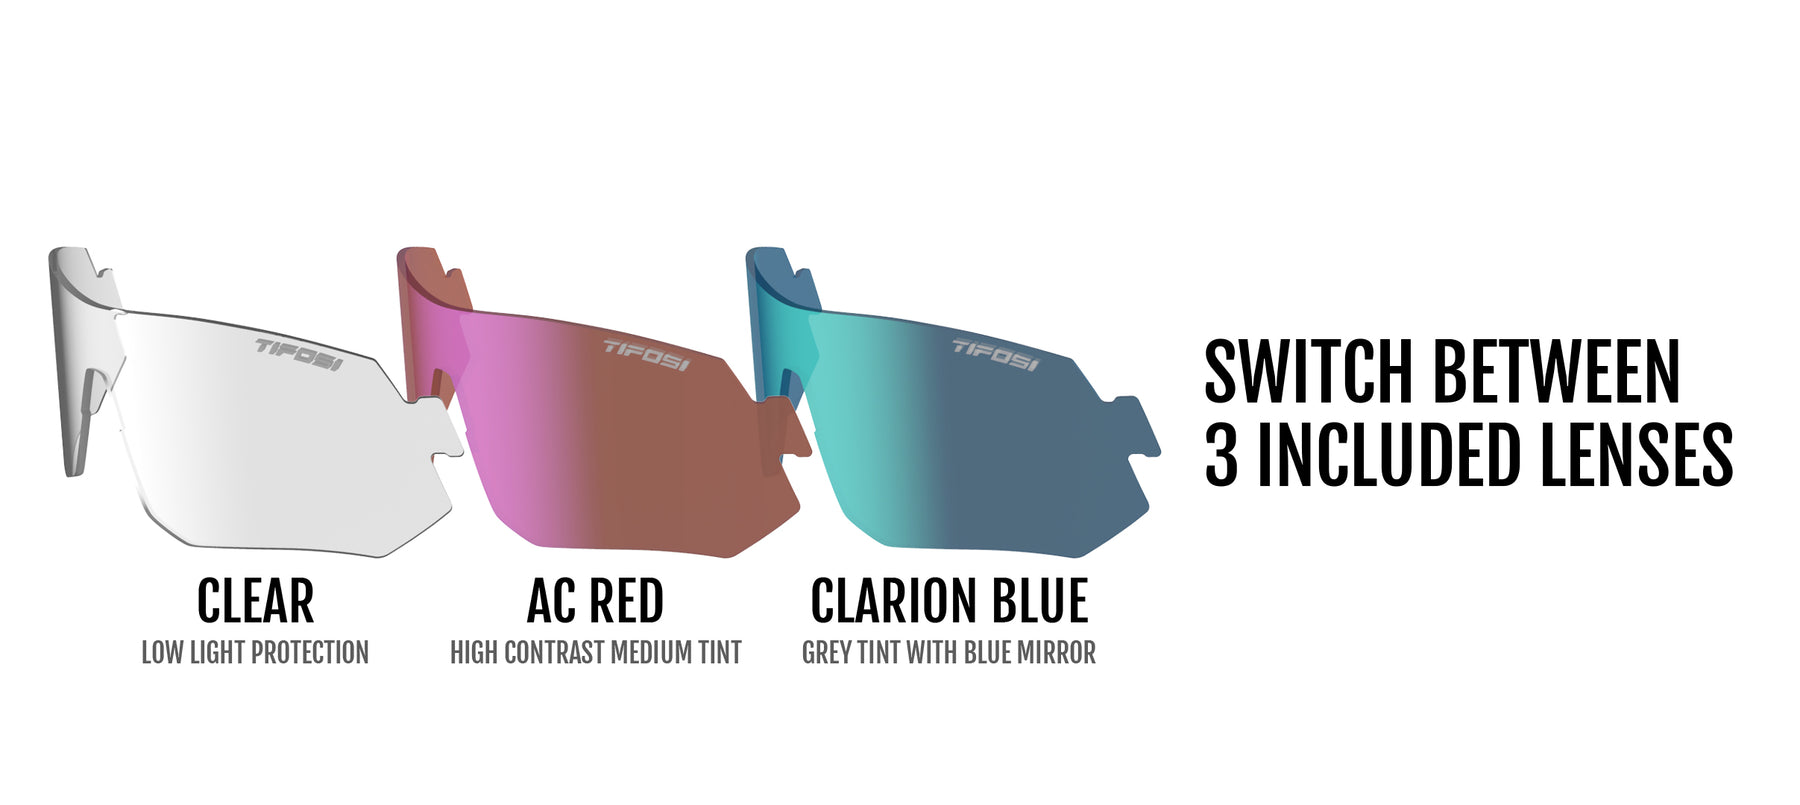 image showing a clear, all-conditions red, and Clarion Blue lens for Tsali model sunglass